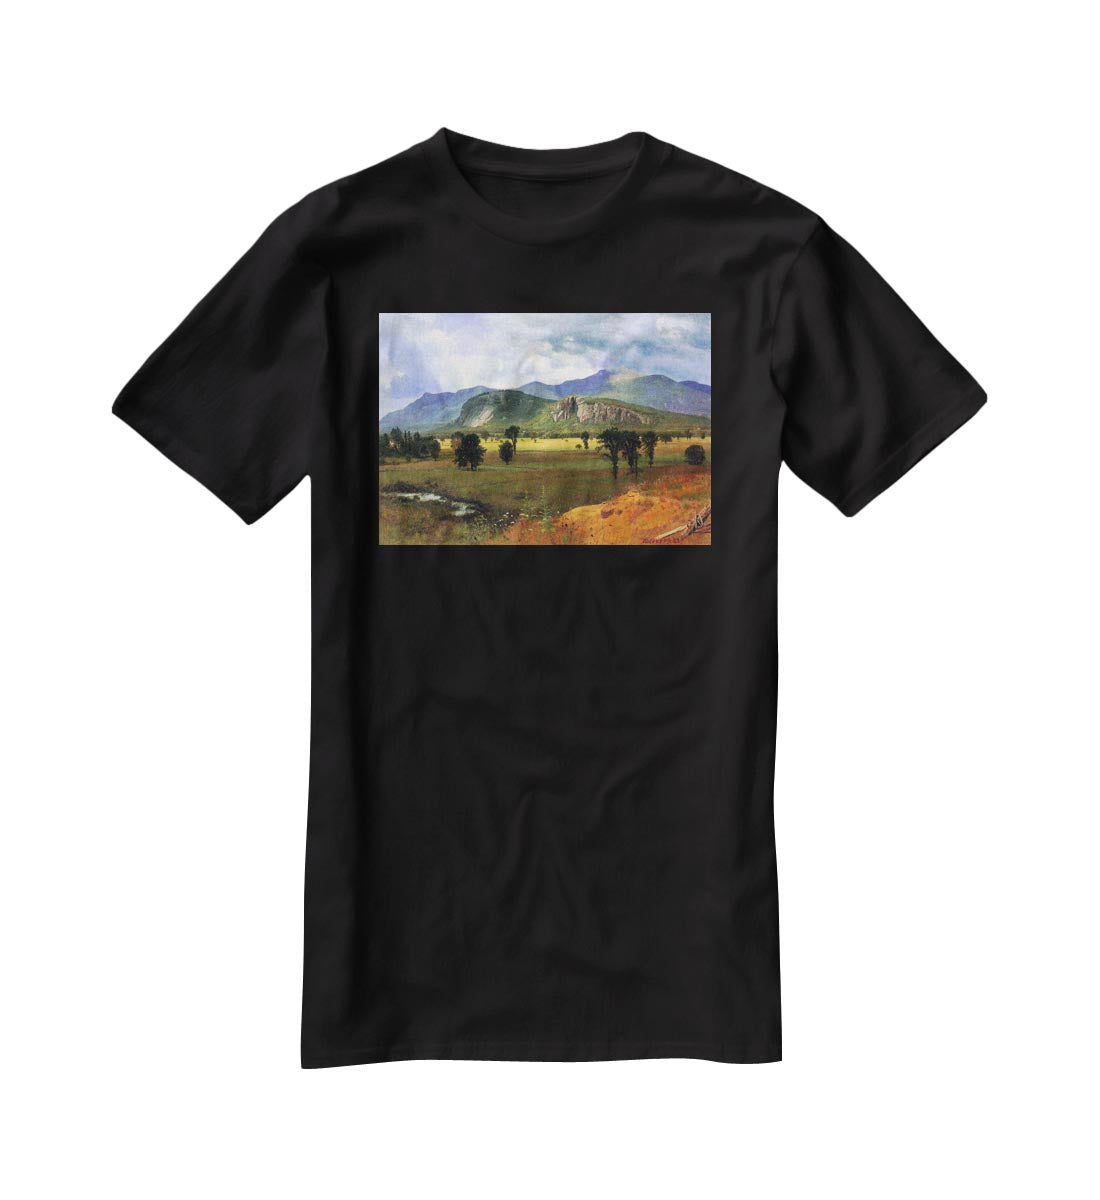 Moat Mountain Intervale New Hampshire by Bierstadt T-Shirt - Canvas Art Rocks - 1